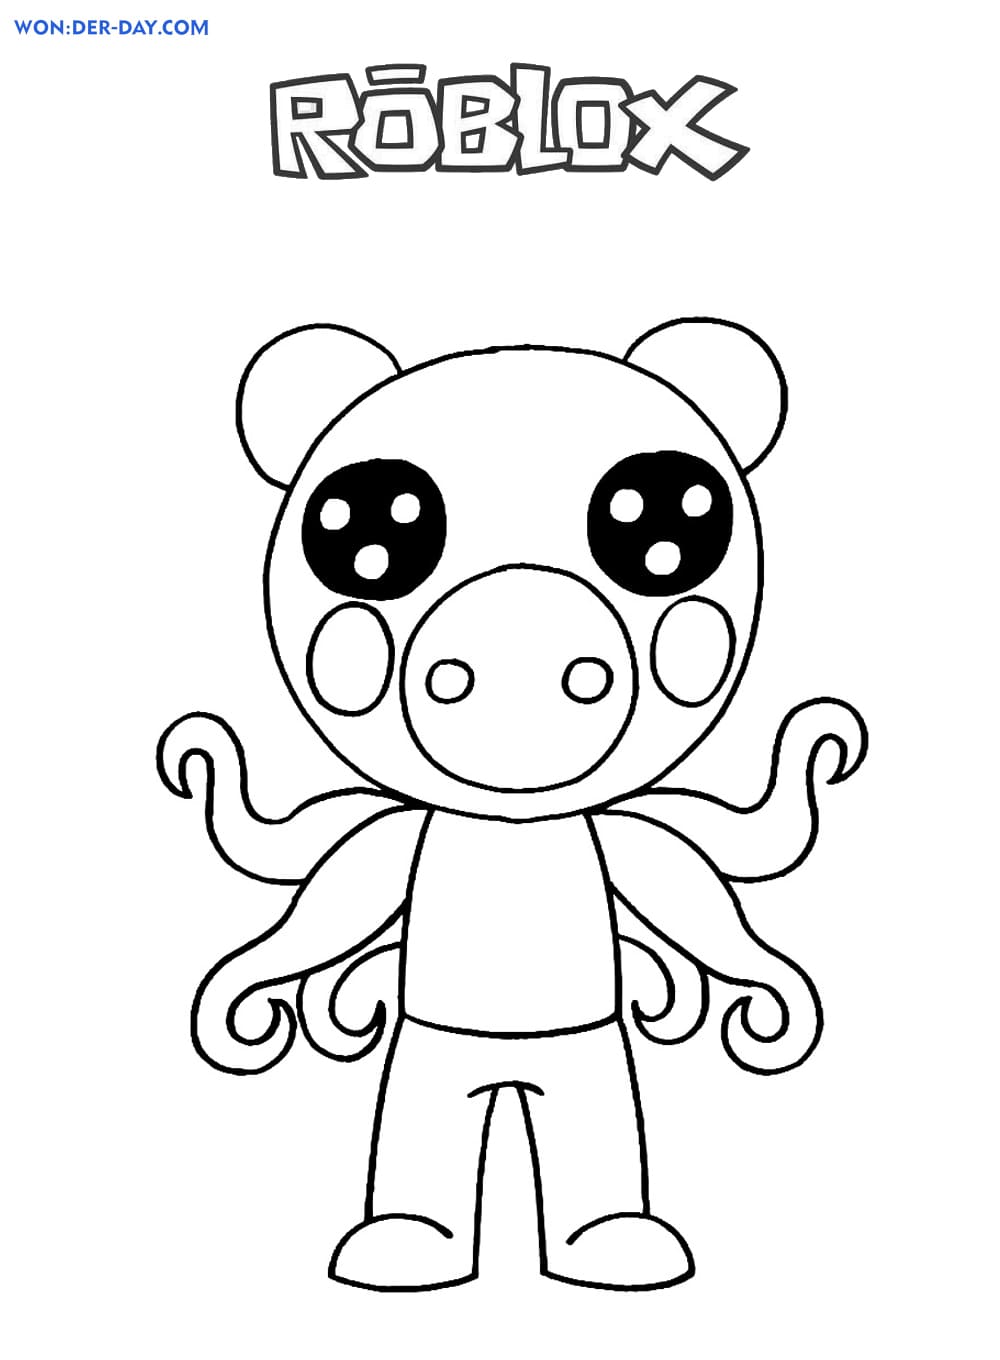 Piggy Roblox Coloring Pages Wonder Day Coloring Pages For Children And Adults - all piggy characters roblox coloring pages